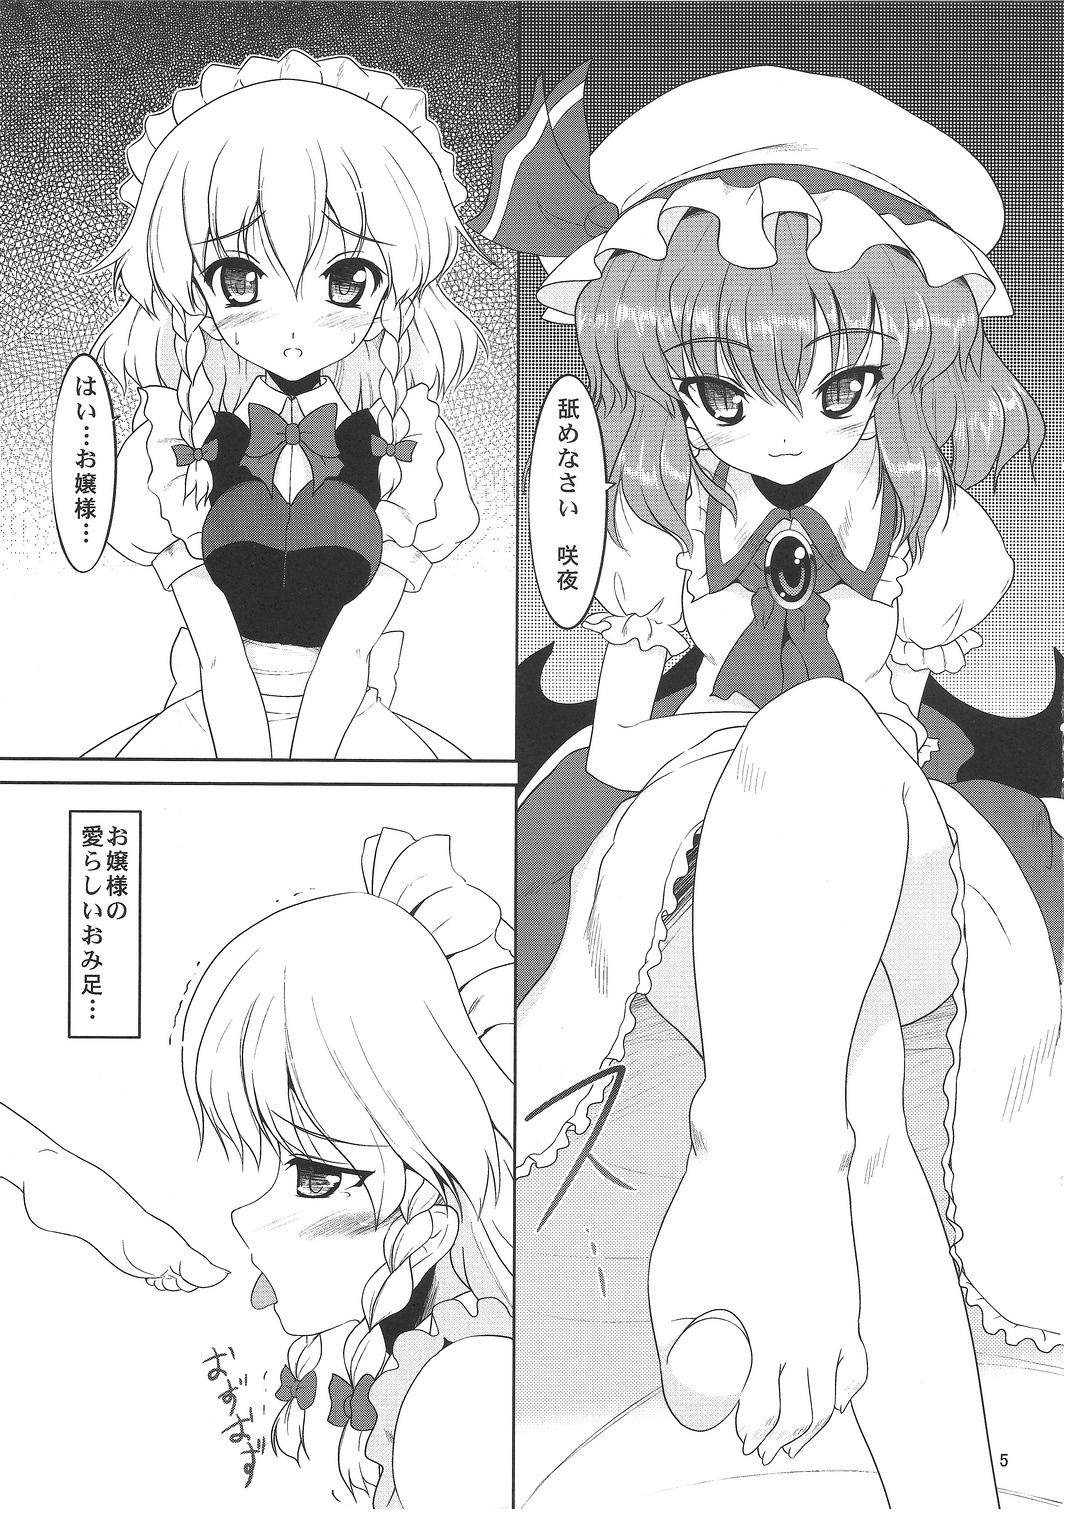 Stroking Maid or Dog - Touhou project Room - Page 4